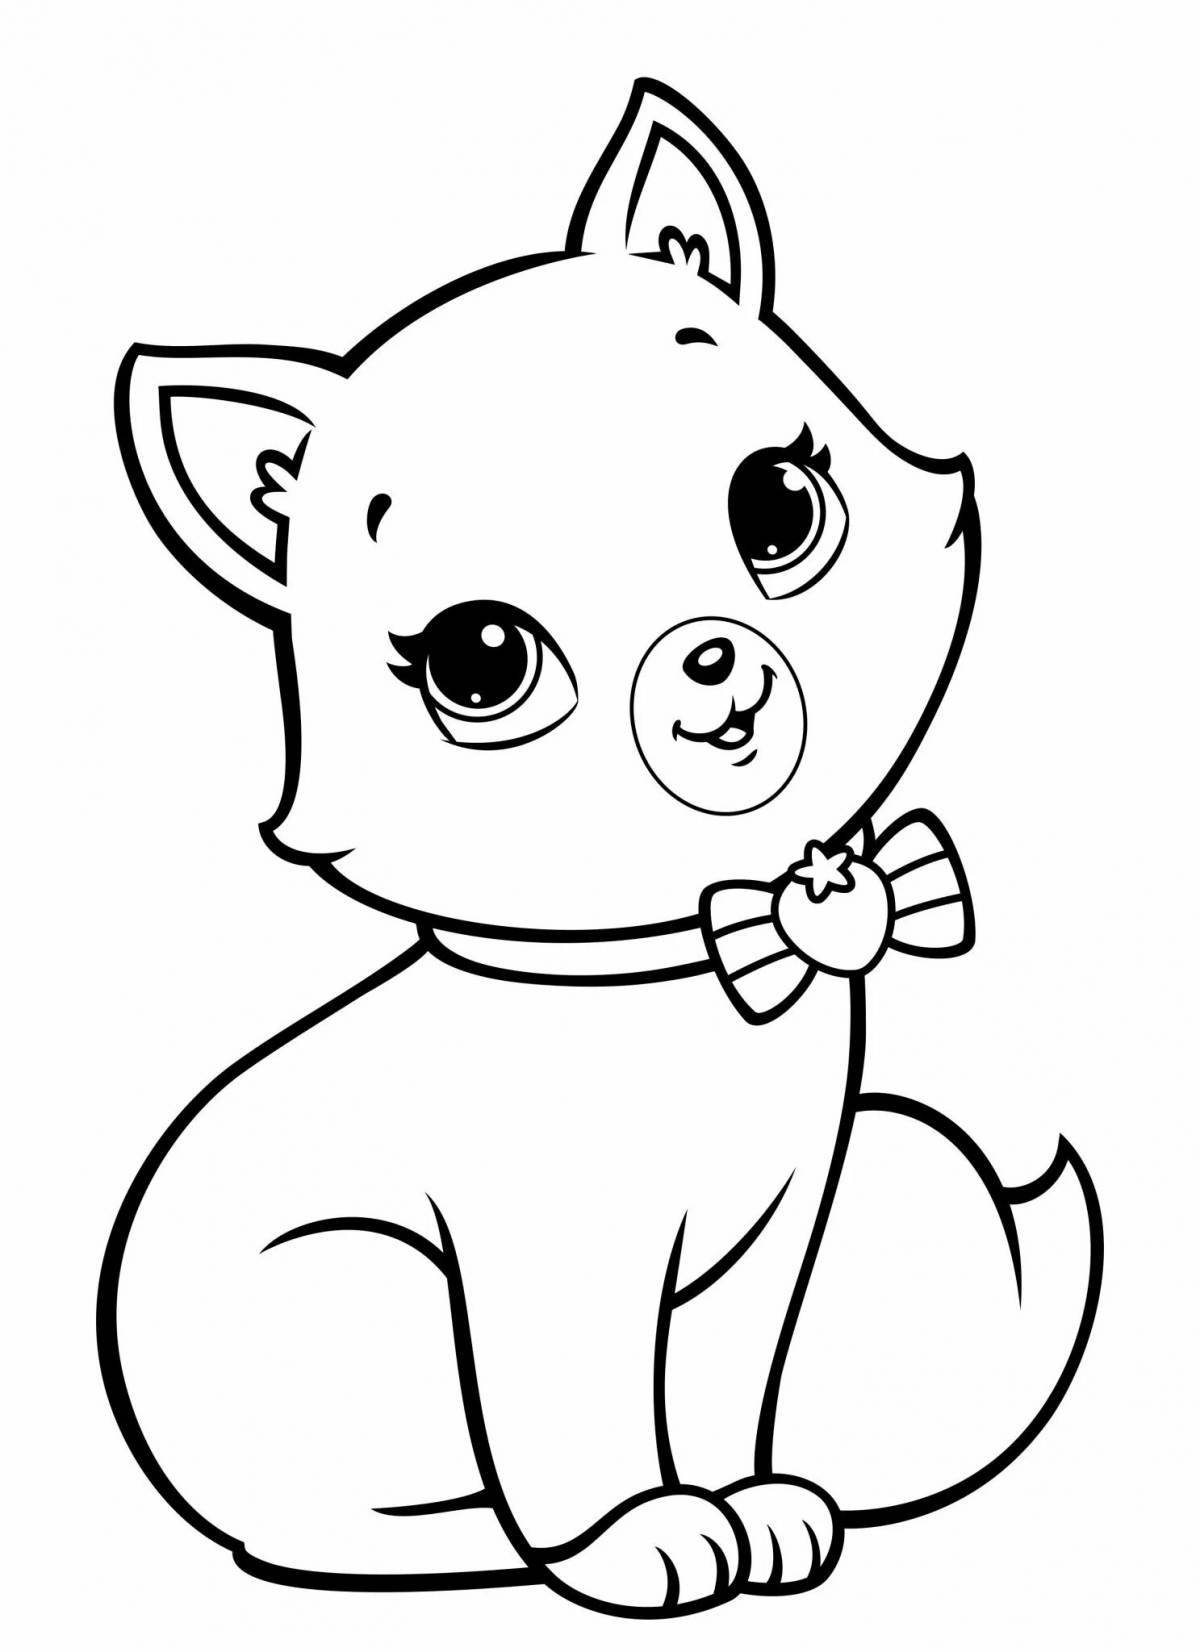 Coloring book sunny cat and dog